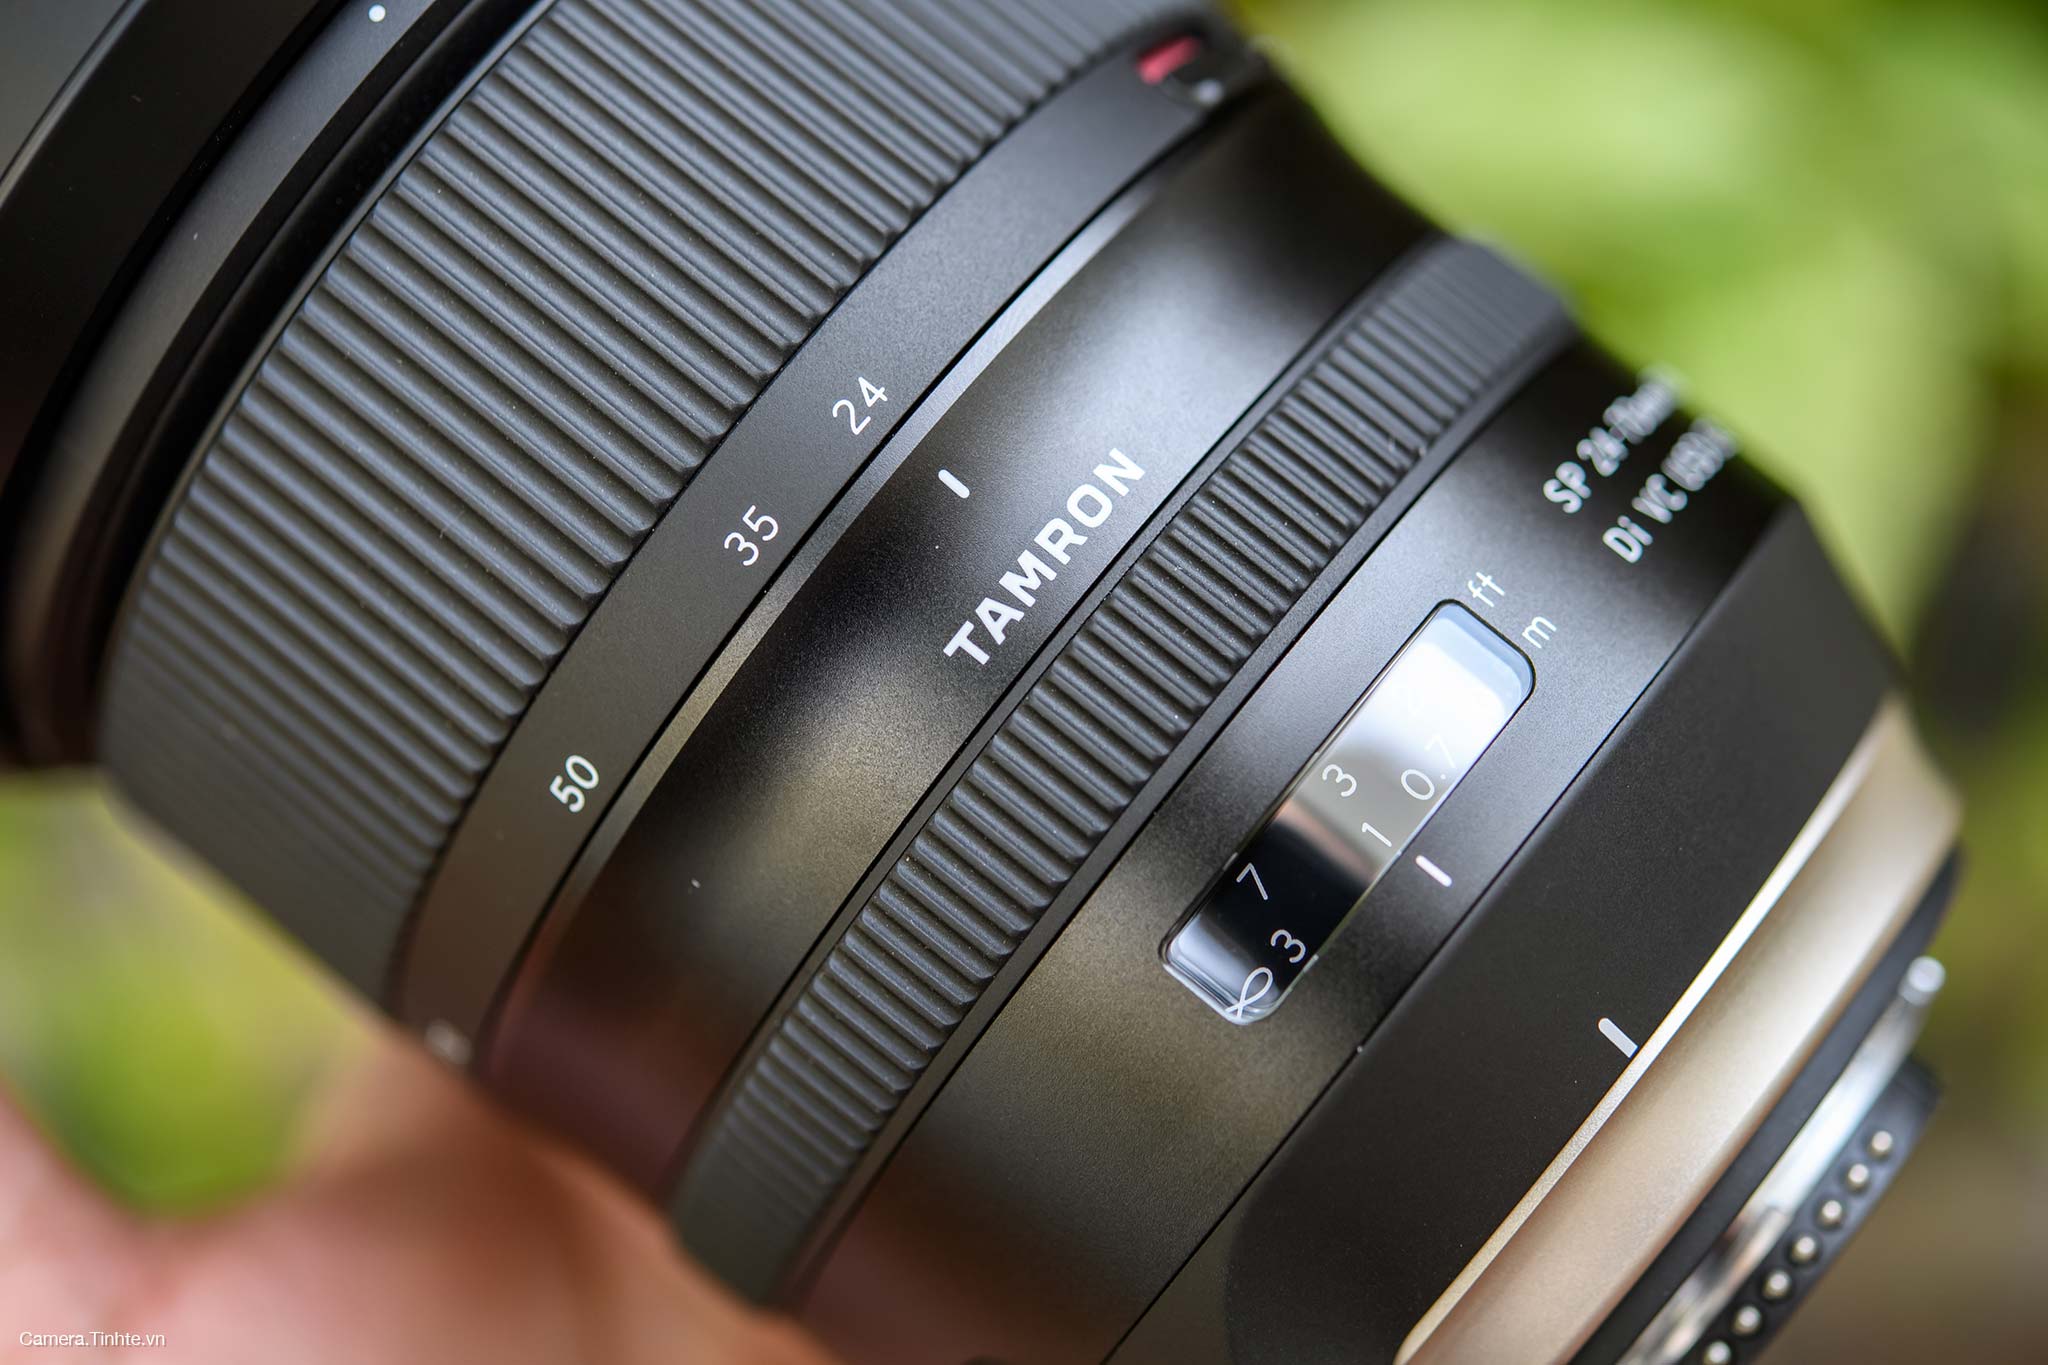 Tamron 24-70mm f/2.8 Di VC USD G2: Zoom lens with optical stabilization.